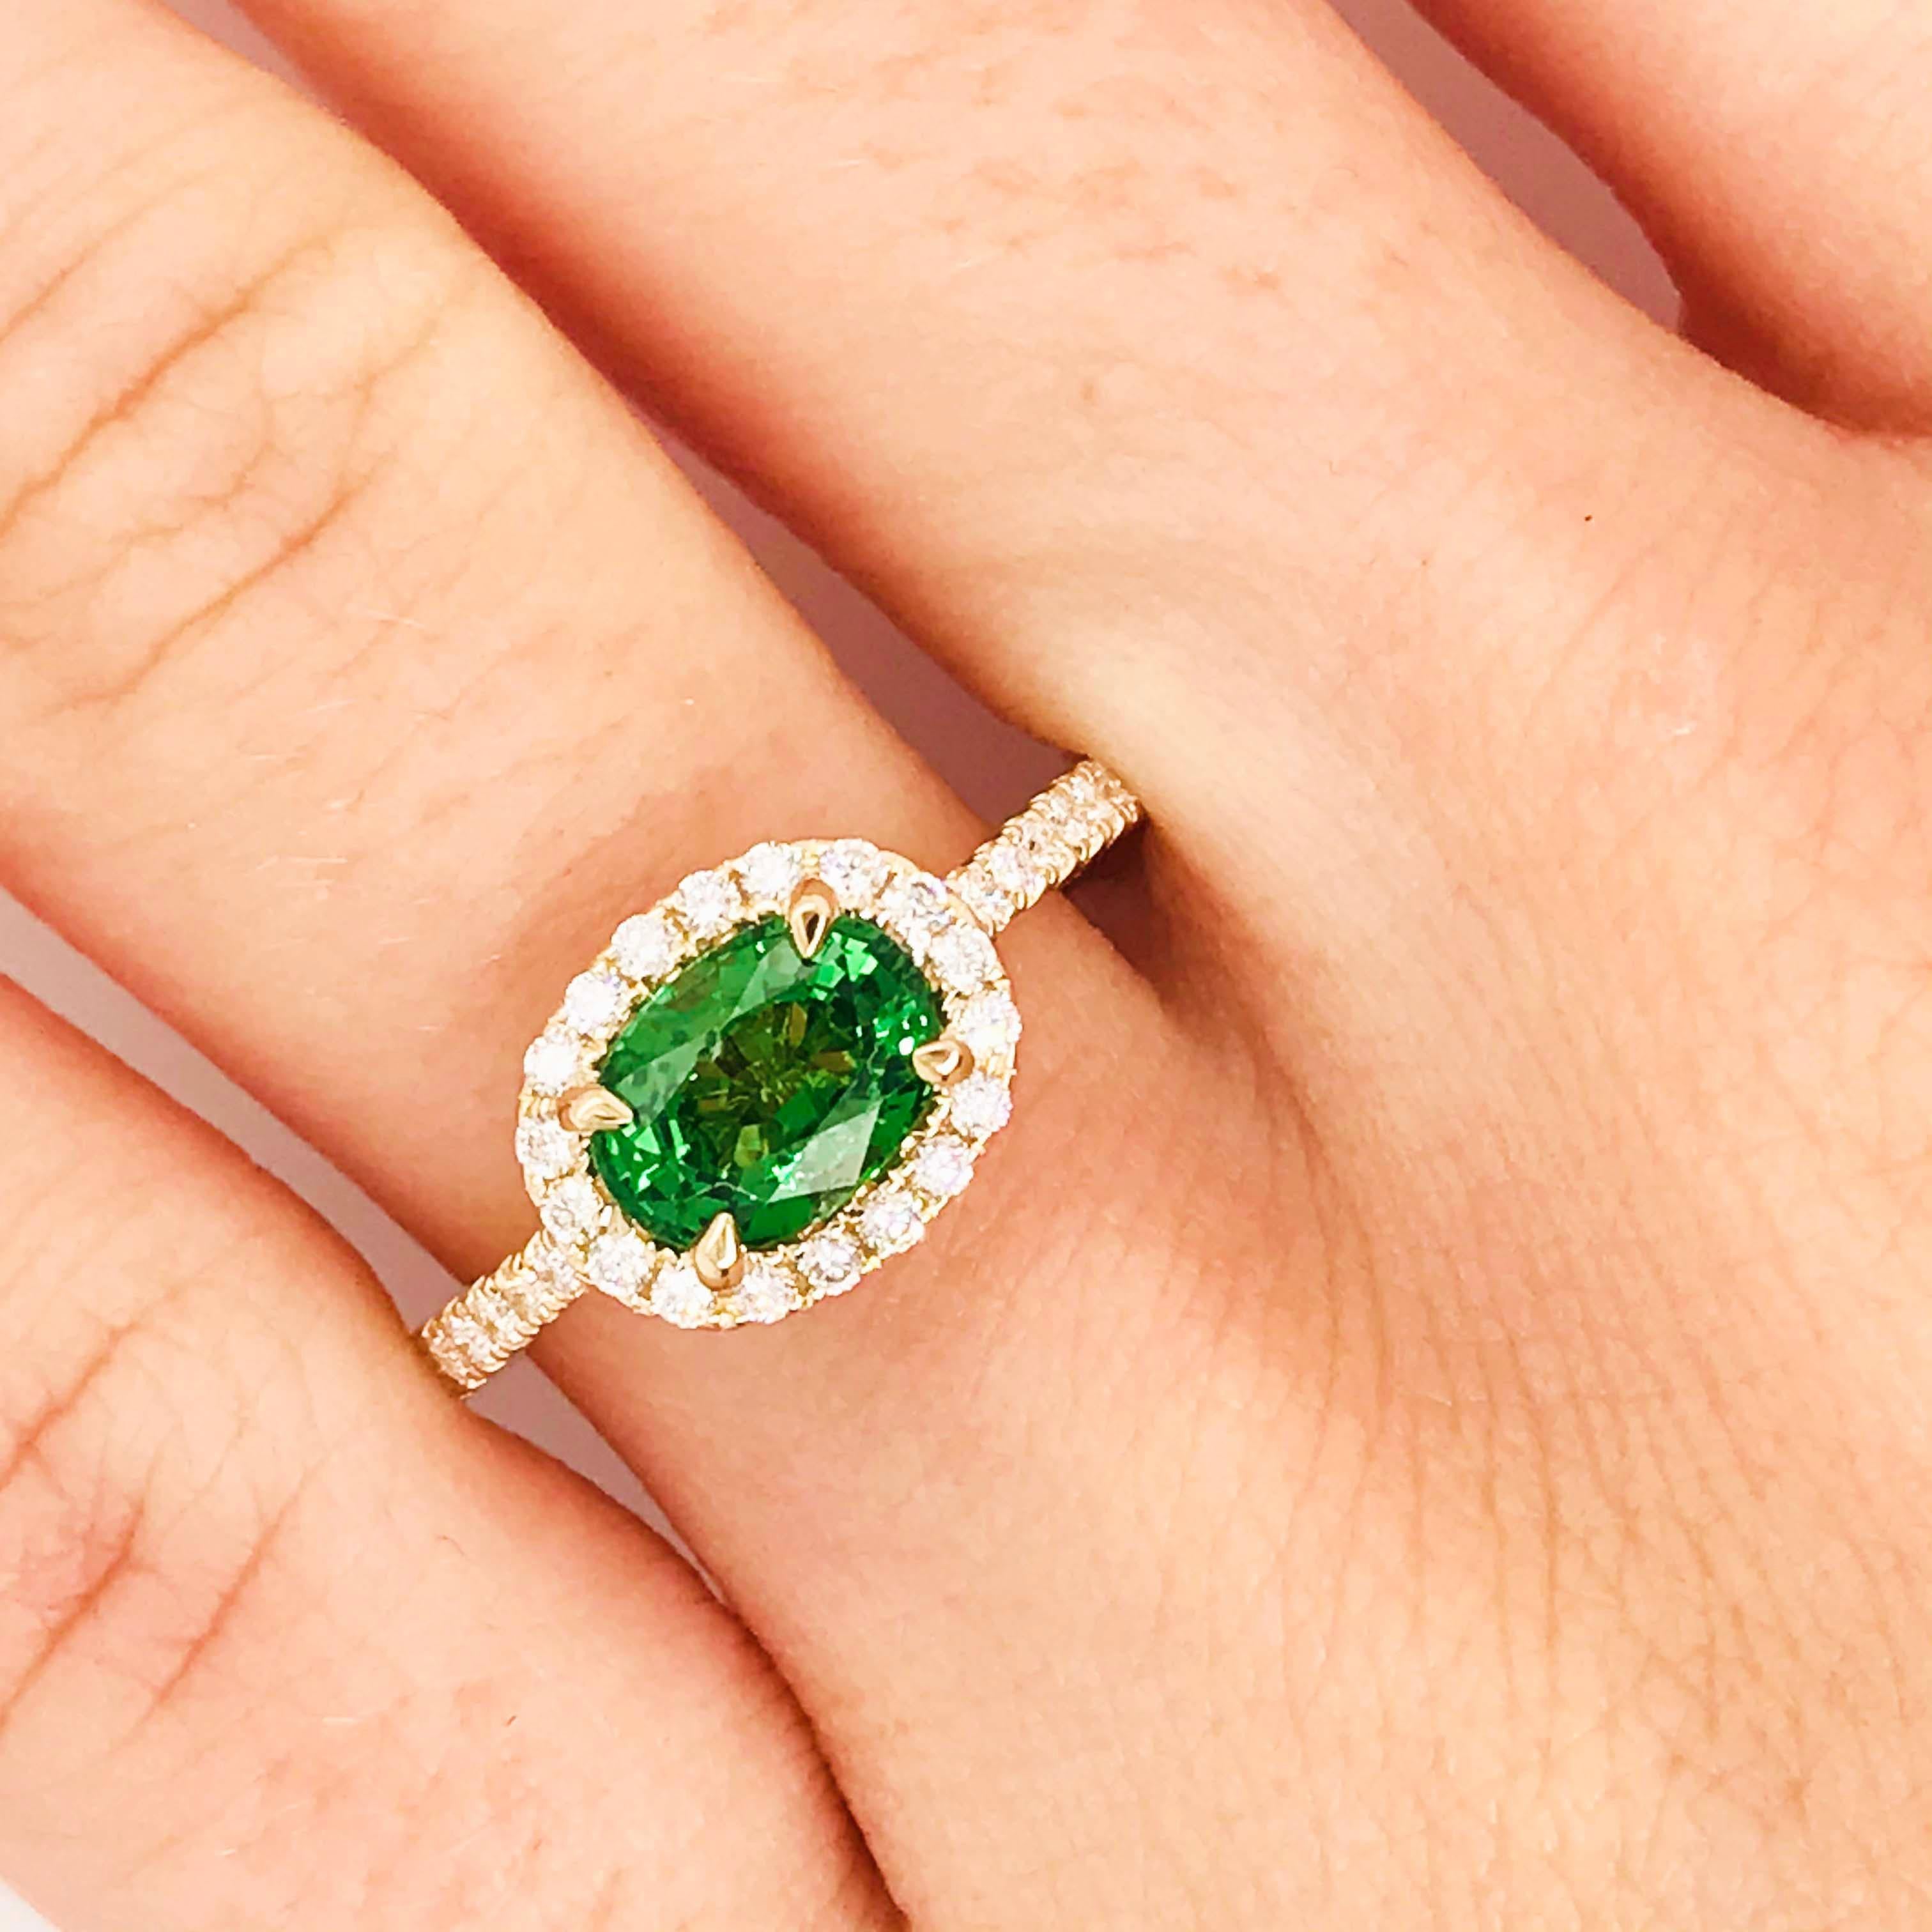 Stunning tsavorite garnet gemstone set in a unique designer setting! This bold ring has a genuine tsavorite garnet gemstone set in four gold, pointed prongs and is framed by a diamond halo. The center setting has bright white, round brilliant